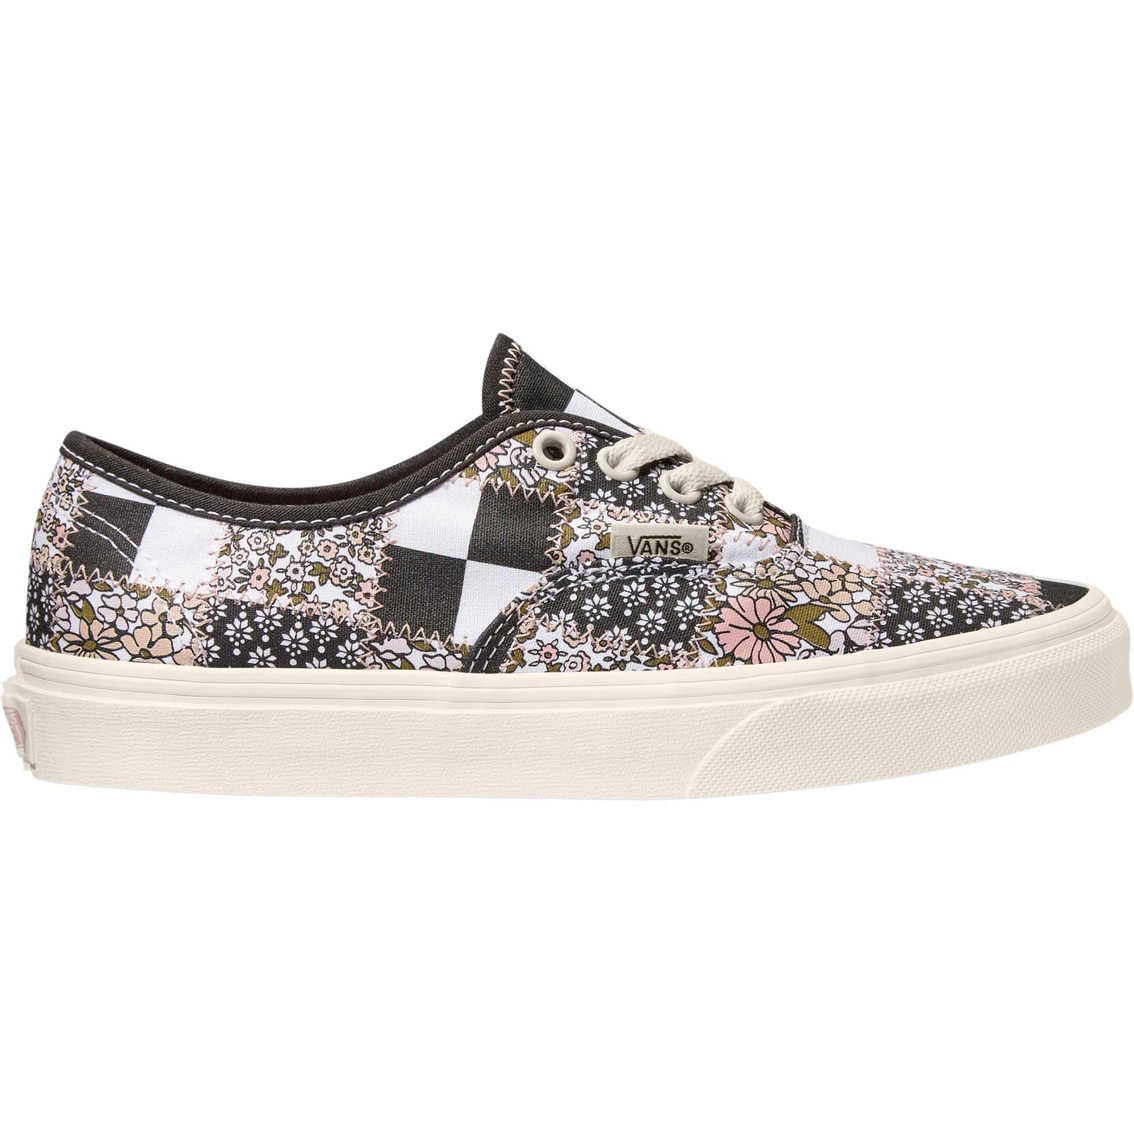 Vans Women's Authentic Patchwork Floral Sneakers | Sneakers | Shoes ...